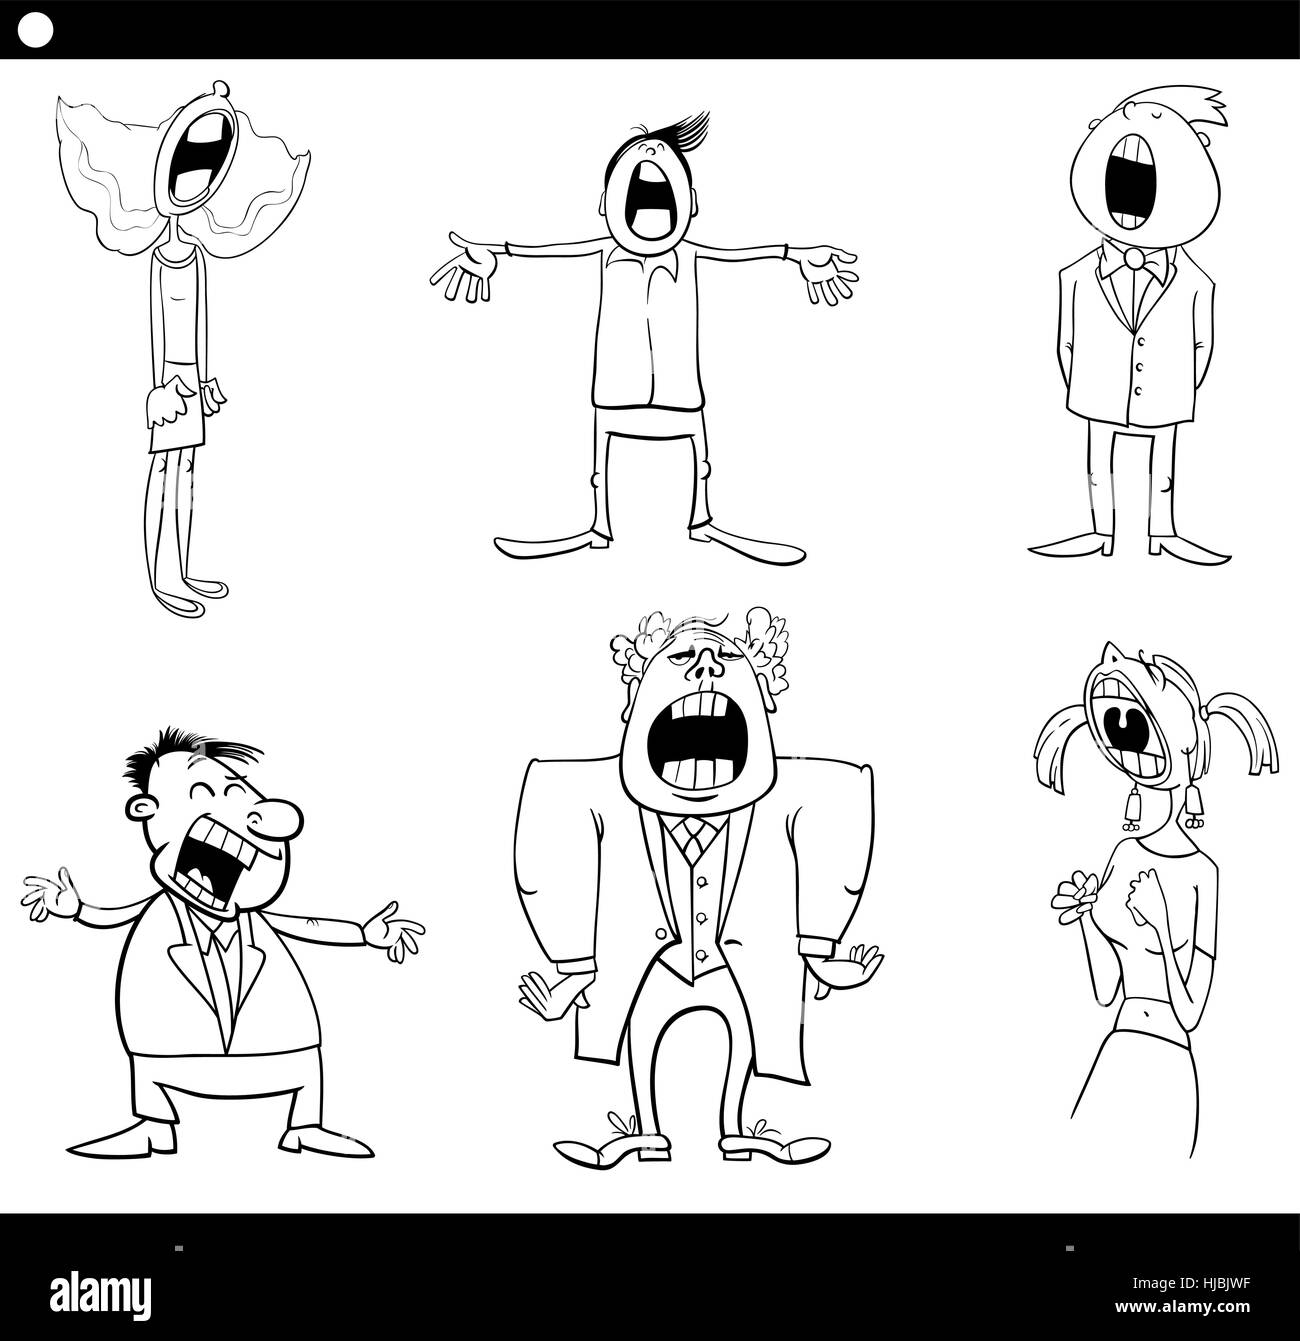 Black and White Cartoon Illustration Singing or Shouting People Characters Coloring Page Stock Vector